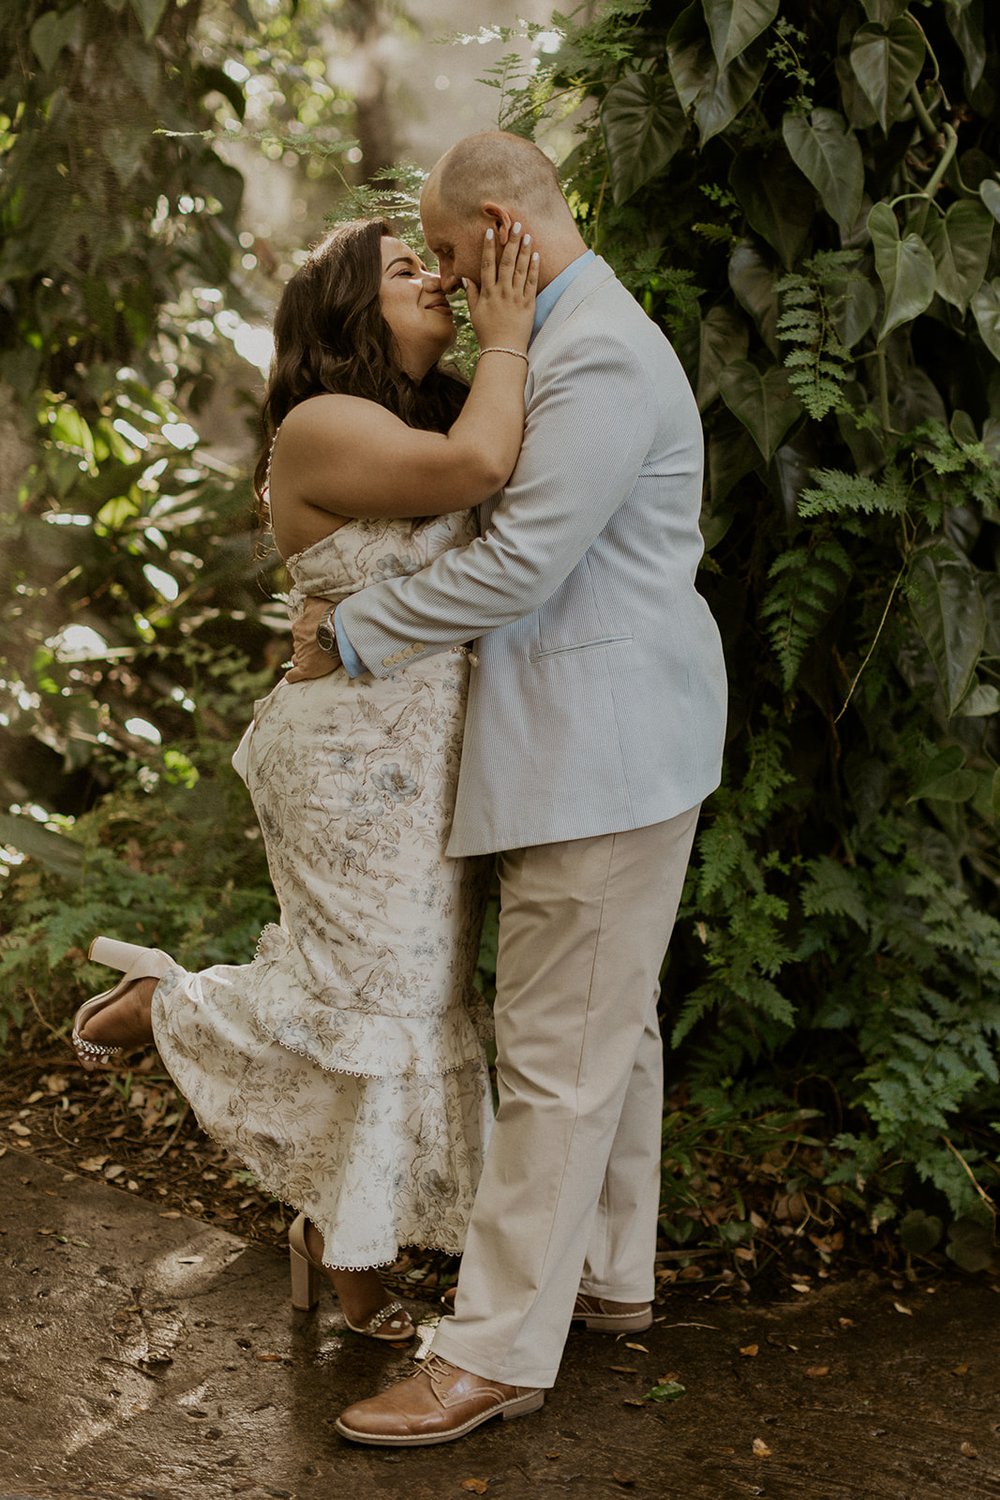 The bride reaches in for a kiss from her groom during their engagement session. 